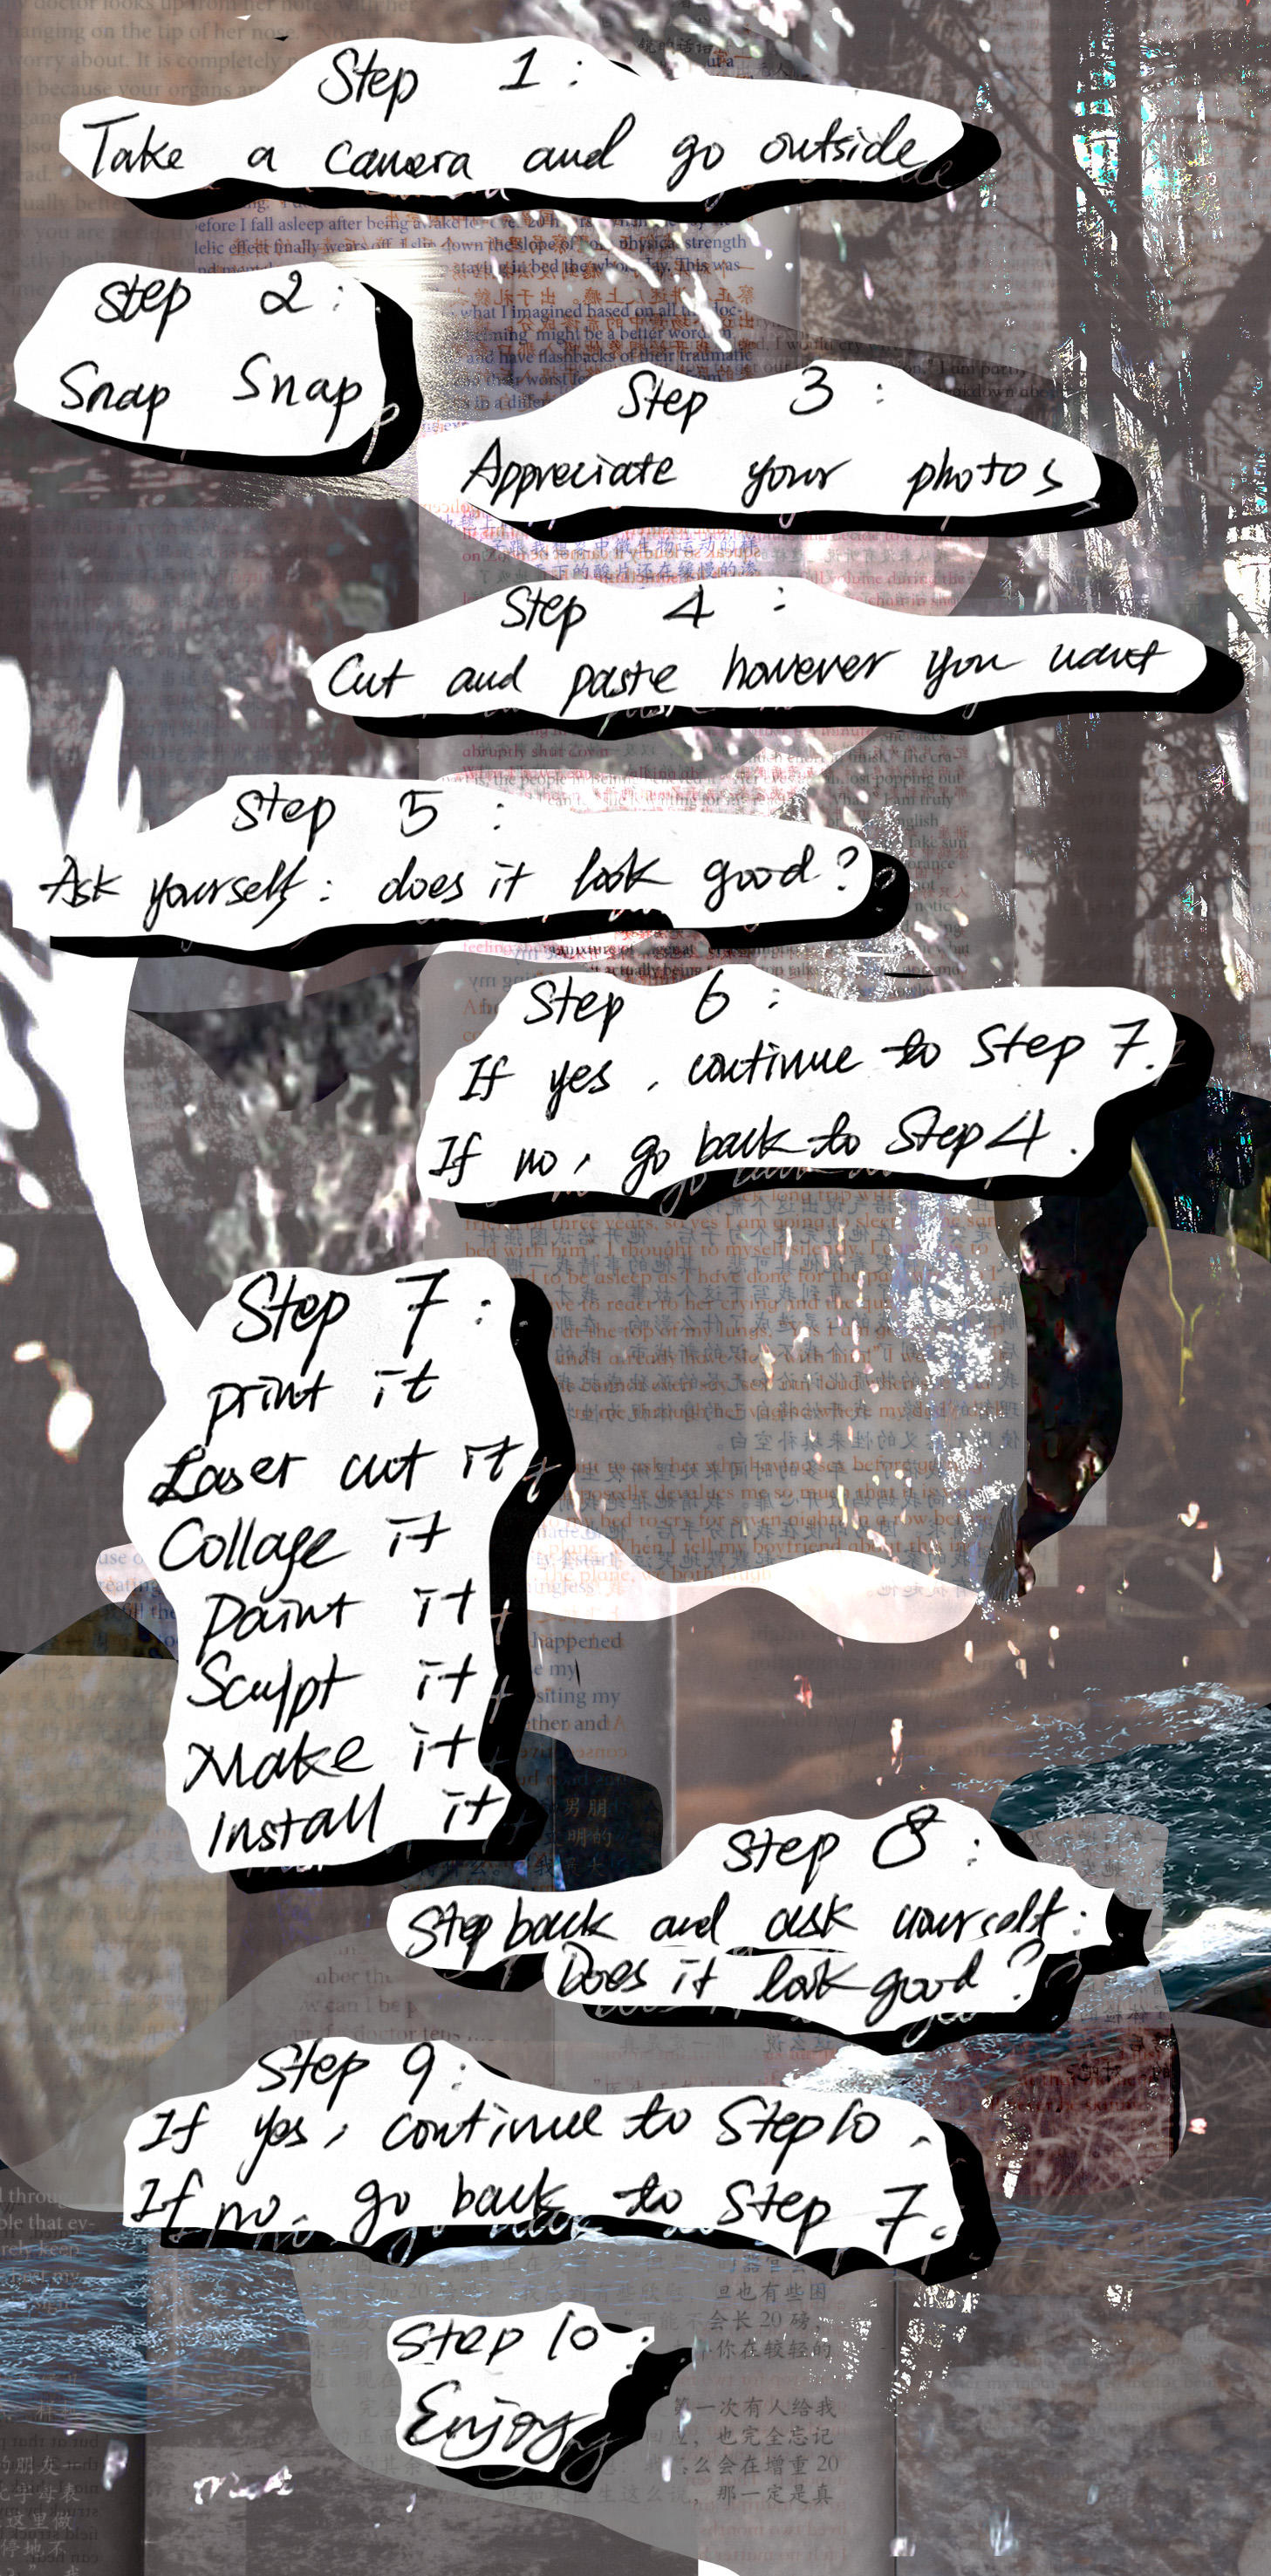 Step 10 creation manual: collaged with handwriting text, scan of narrative prose printed on vellum, and digital collage.